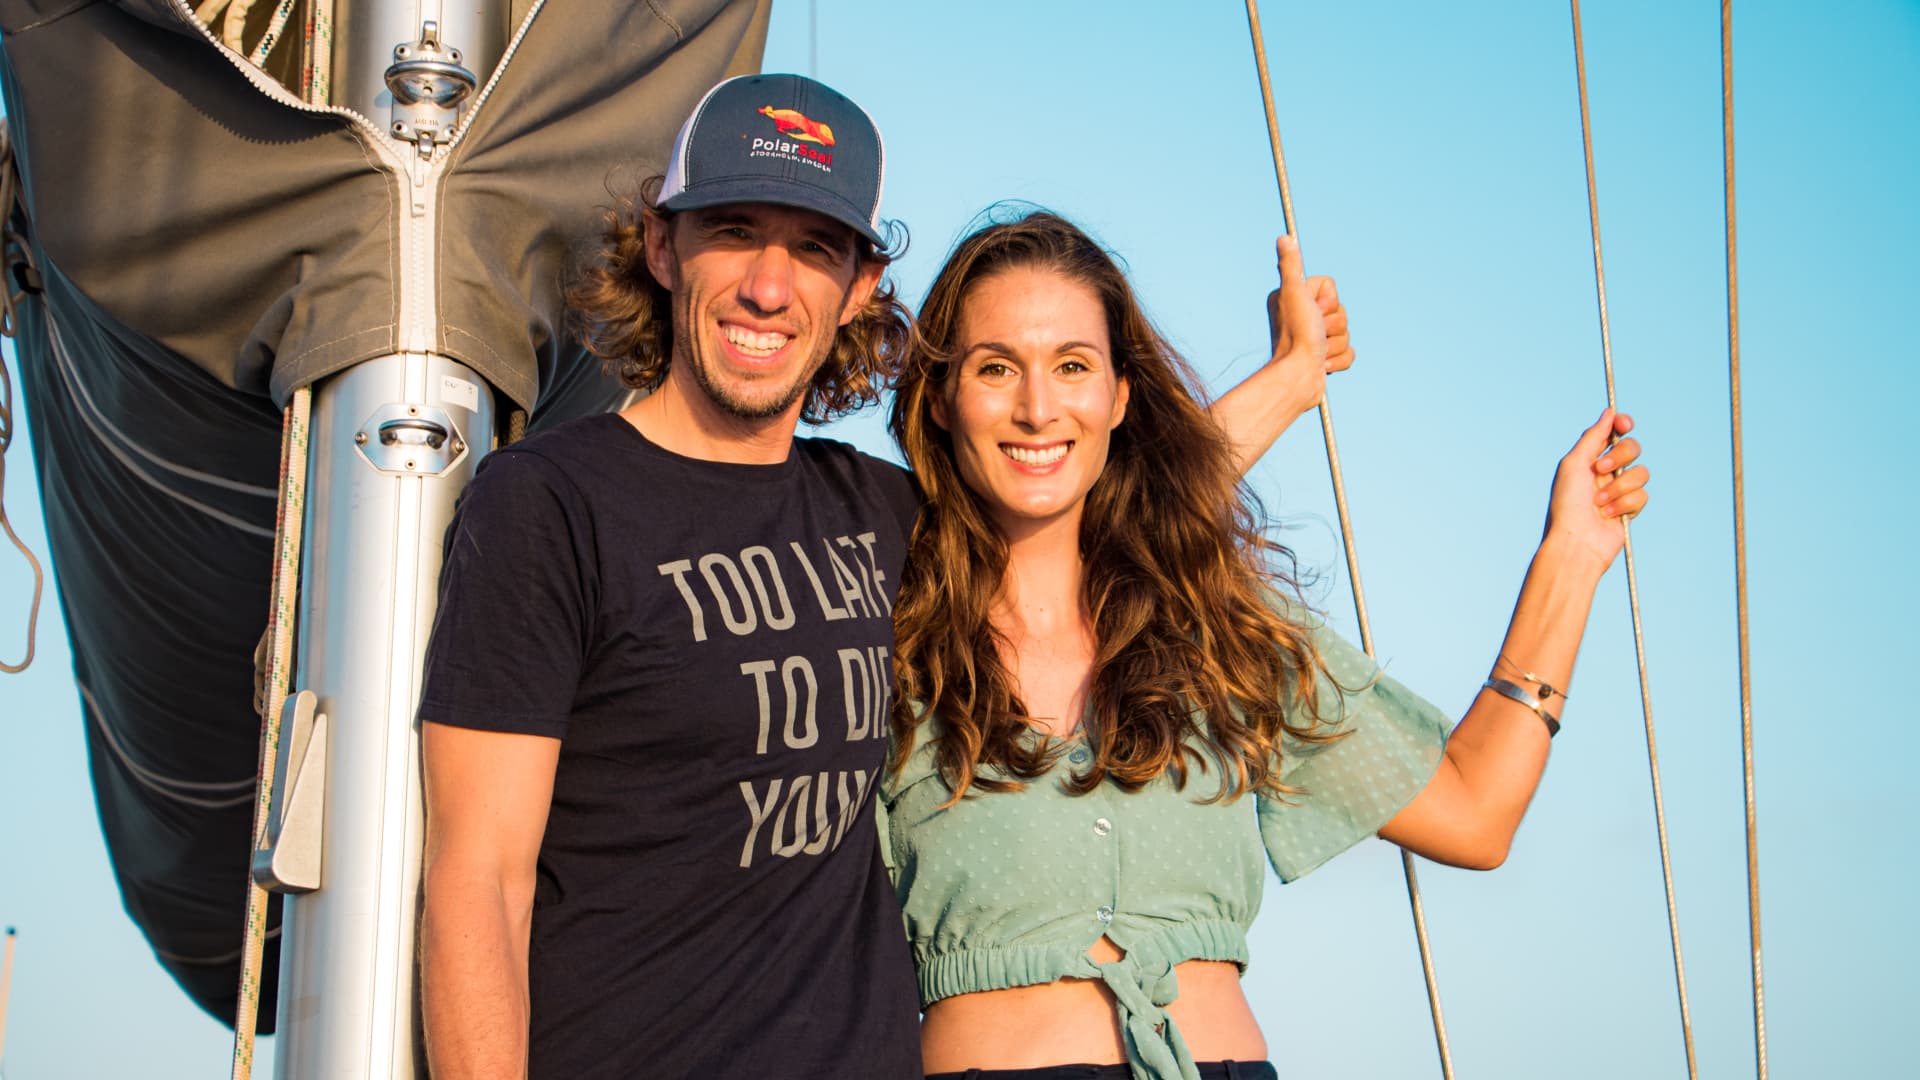 American Ryan Ellison and Frenchwoman Sophie Darsy, who are now both Swedish nationals, bought their boat for $90,000 in 2016.